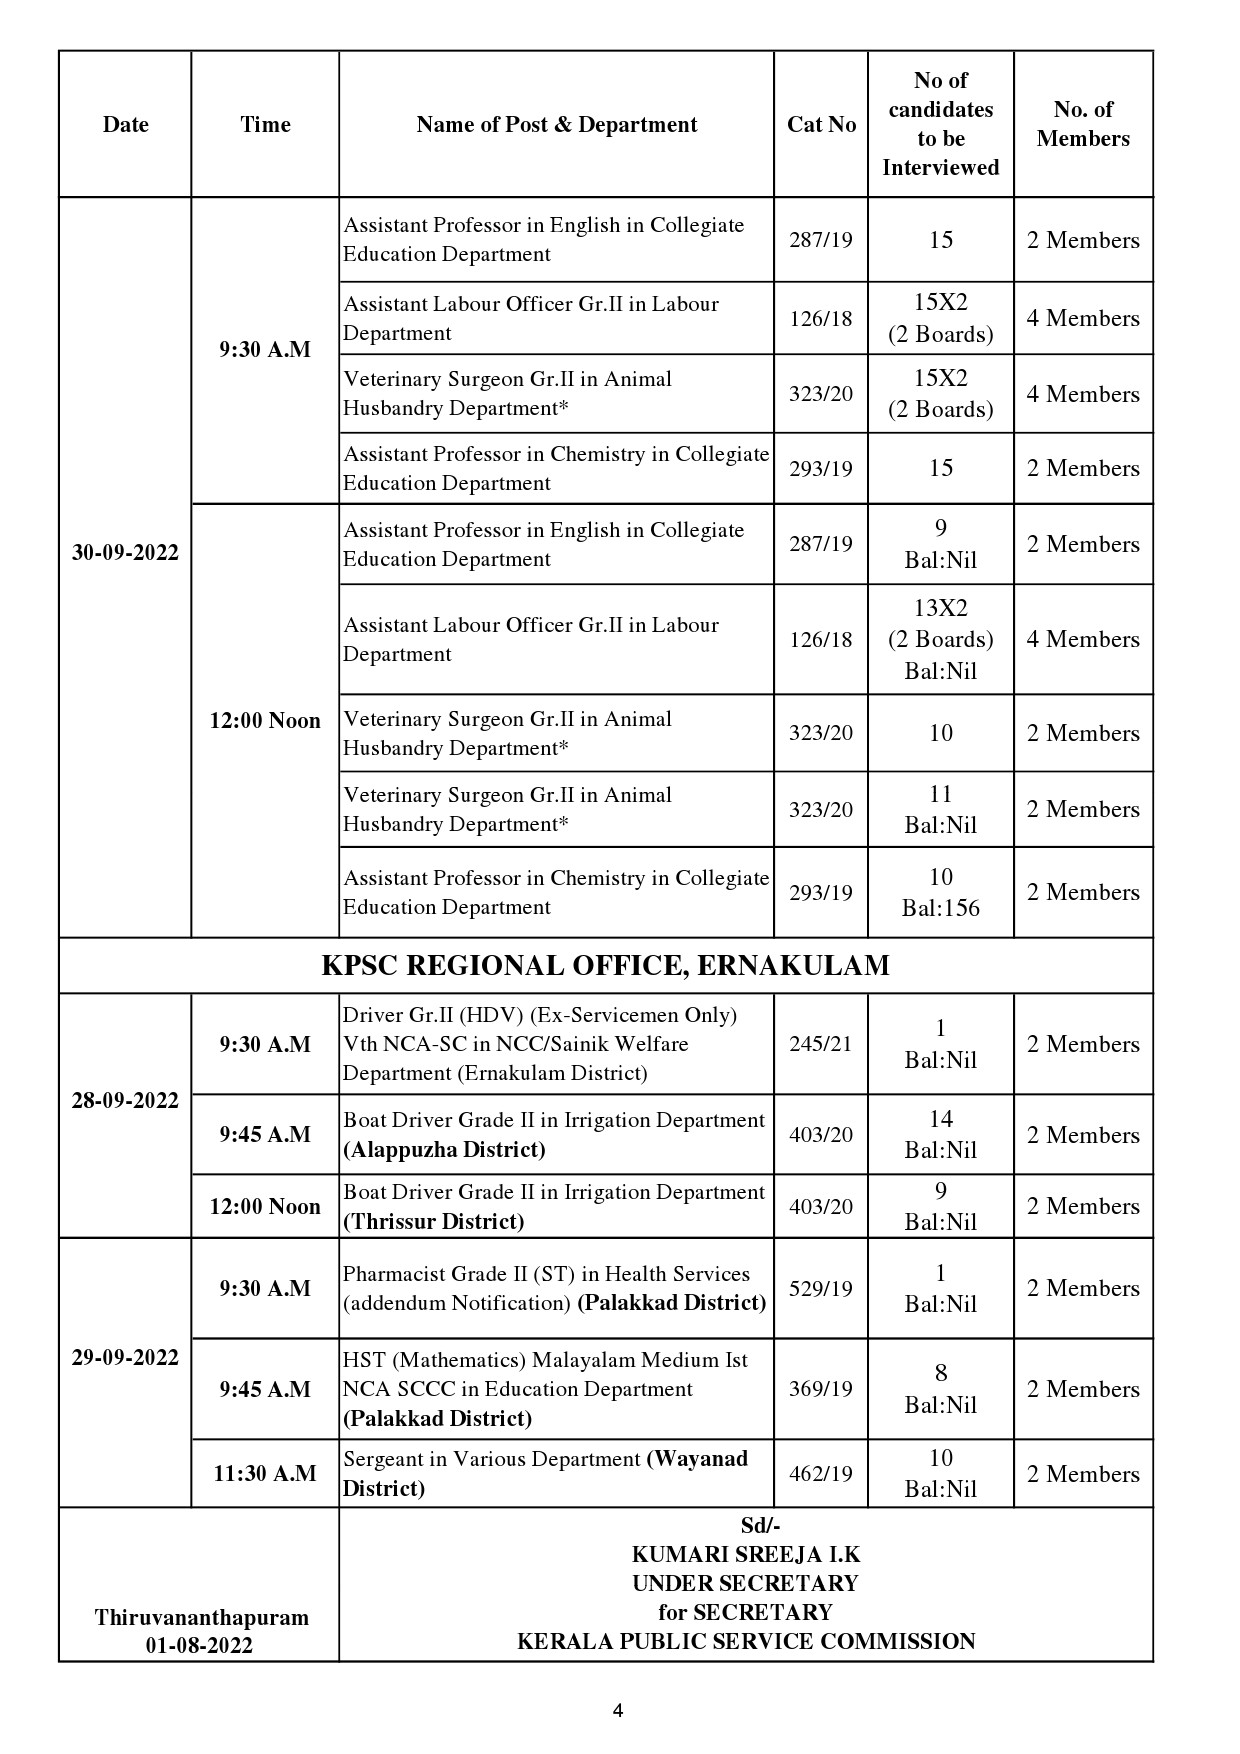 Interview Programme For The Month Of September 2022 - Notification Image 4